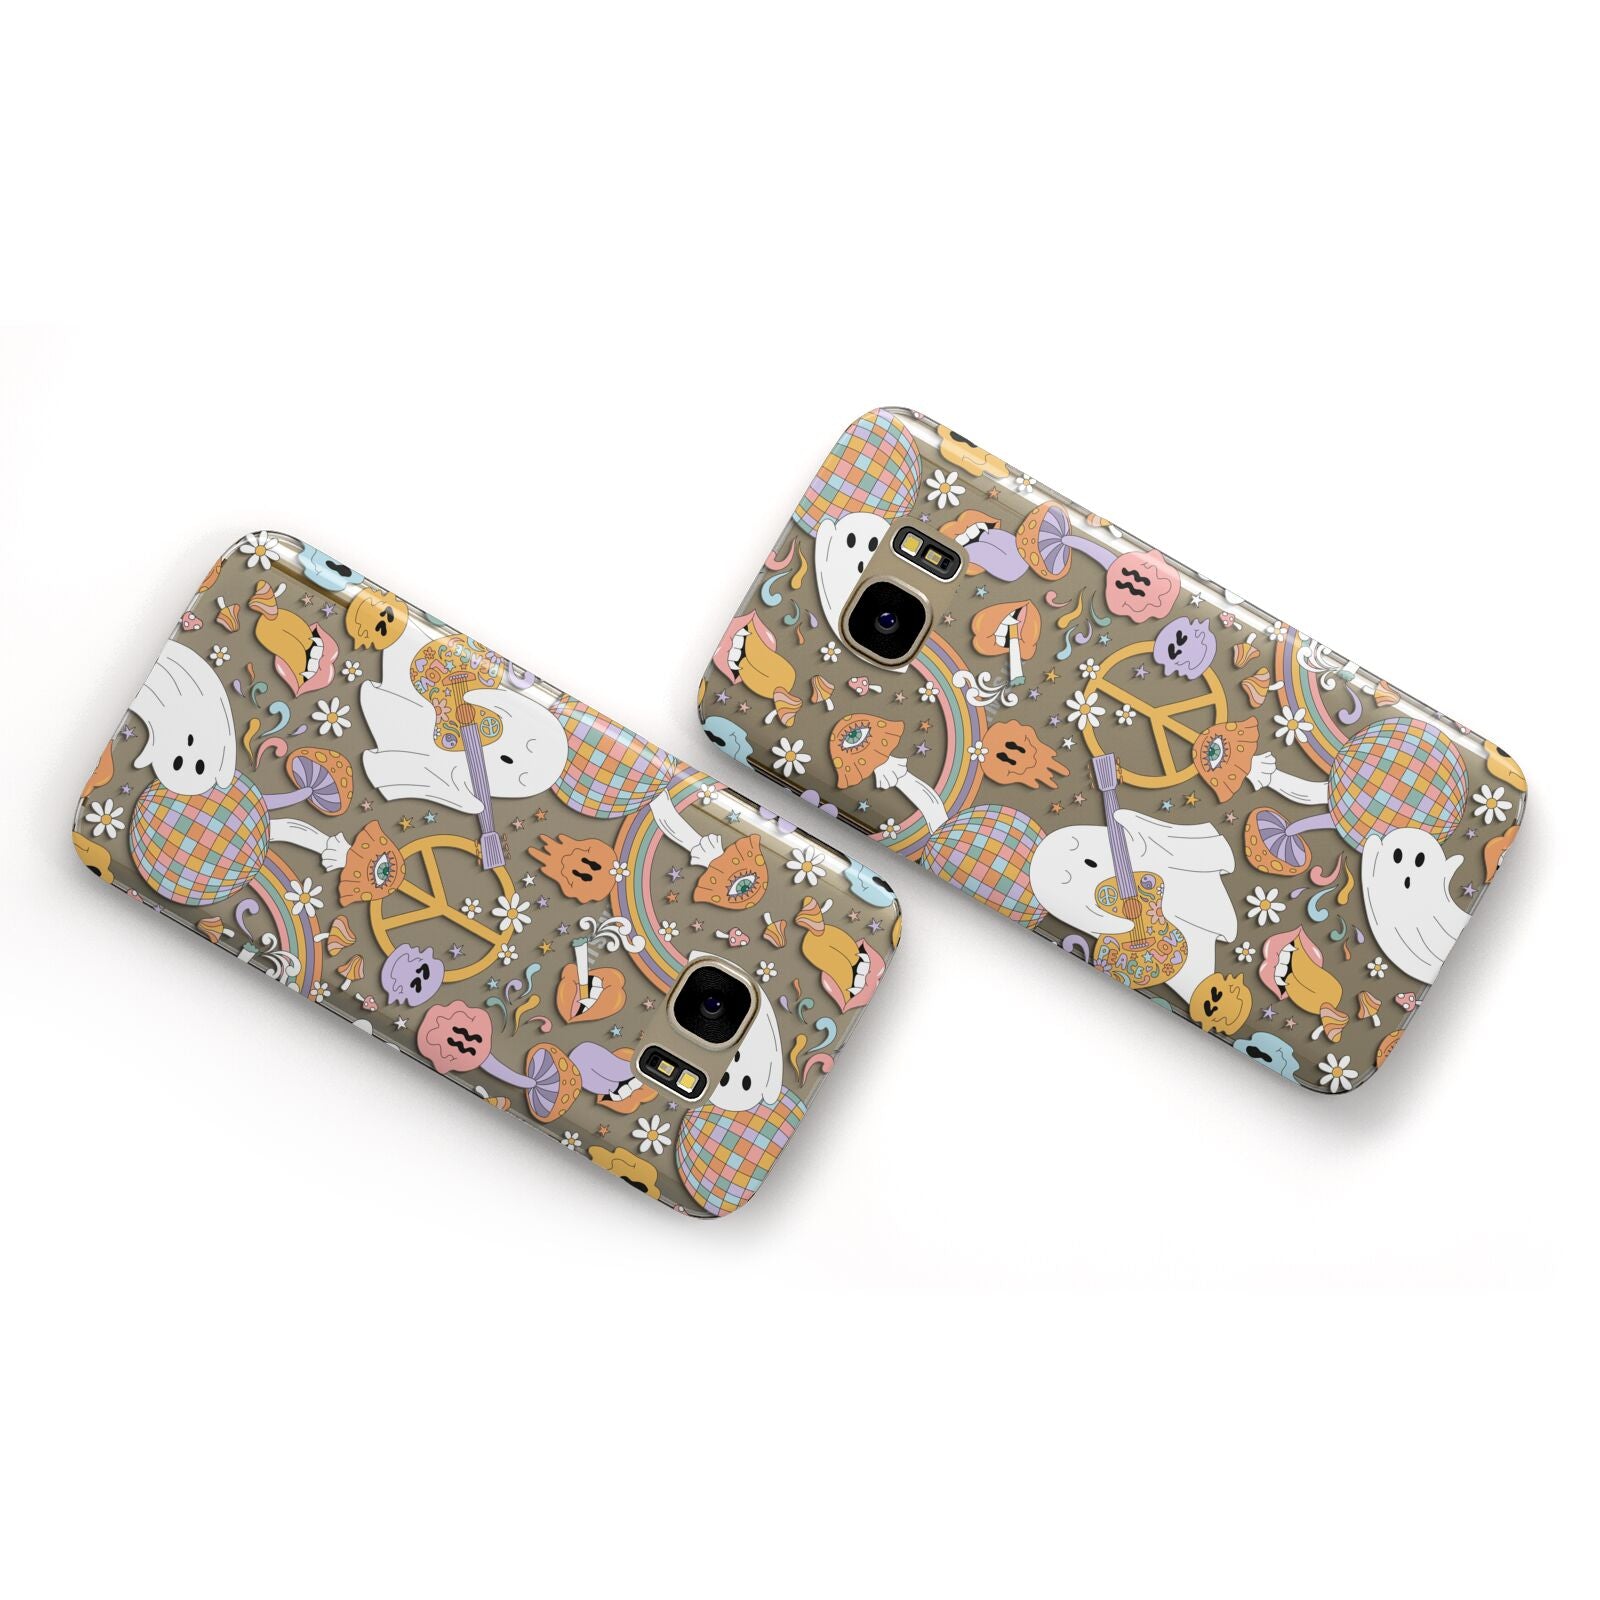 Disco Ghosts Samsung Galaxy Case Flat Overview